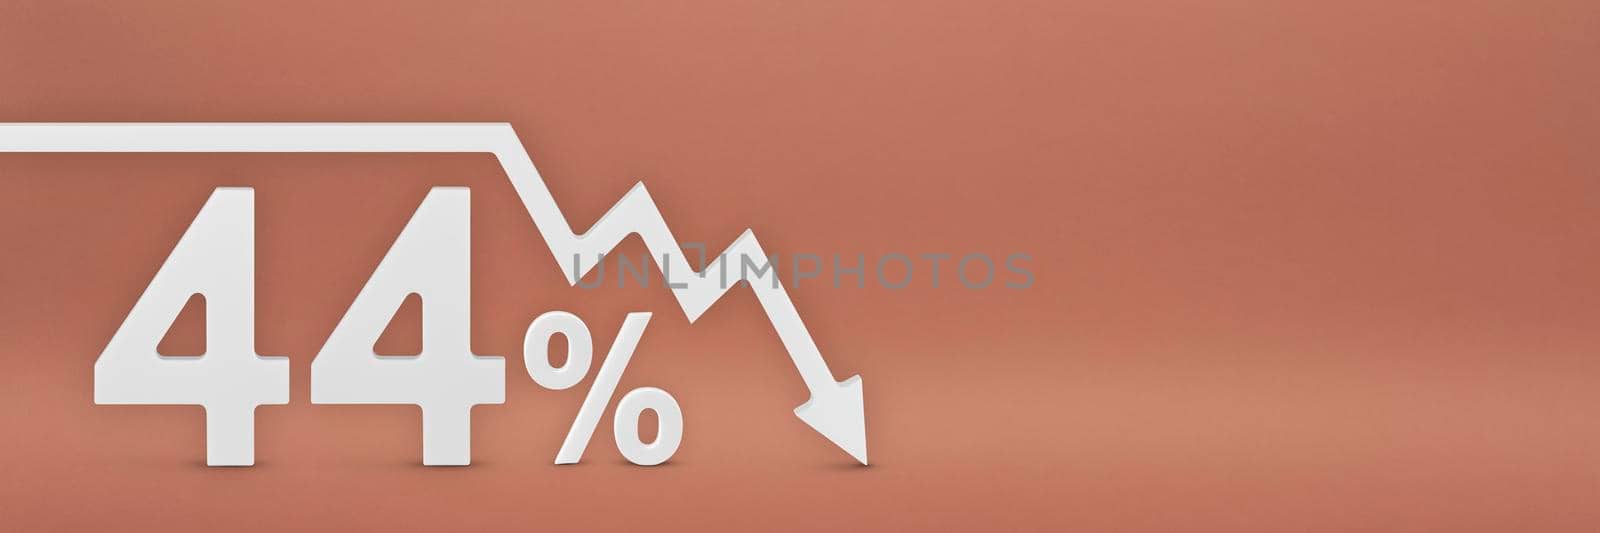 forty-four percent, the arrow on the graph is pointing down. Stock market crash, bear market, inflation.Economic collapse, collapse of stocks.3d banner,44 percent discount sign on a red background. by SERSOL